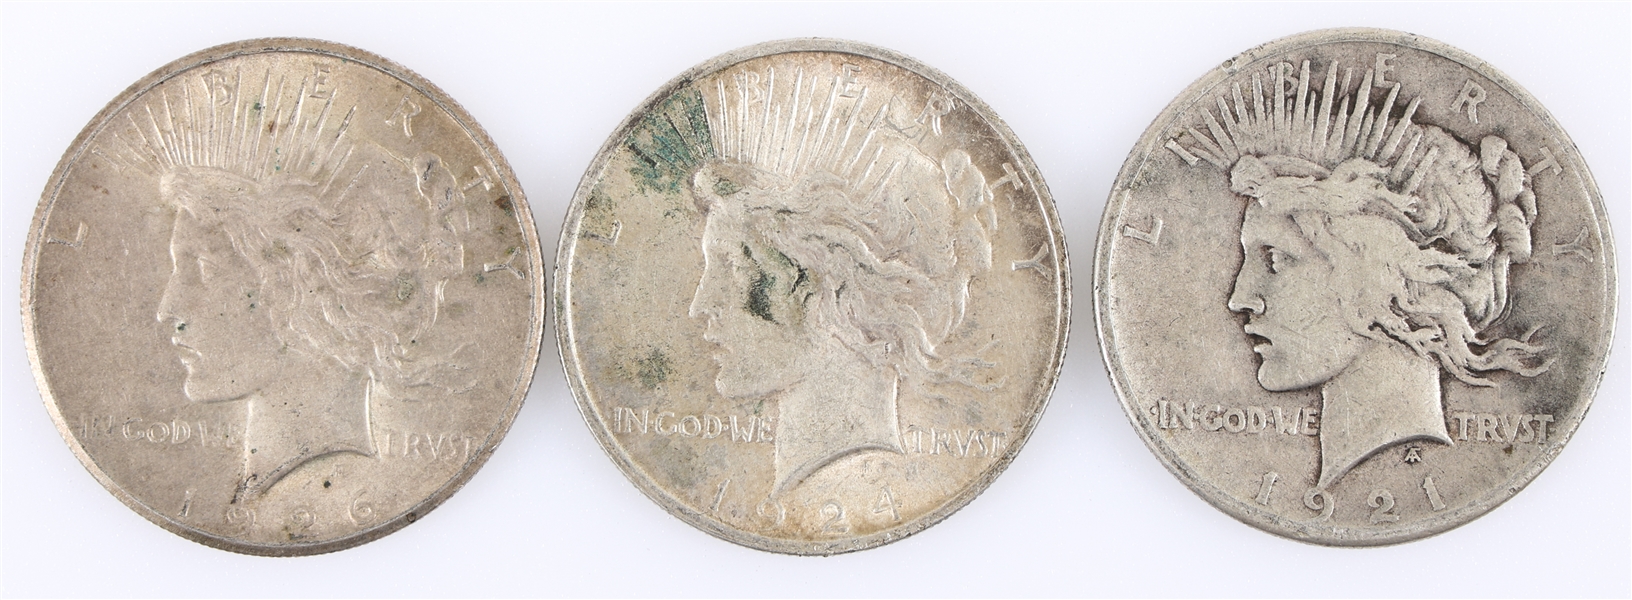 1921, 1924, 1926 US SILVER PEACE DOLLAR COINS LOT OF 3